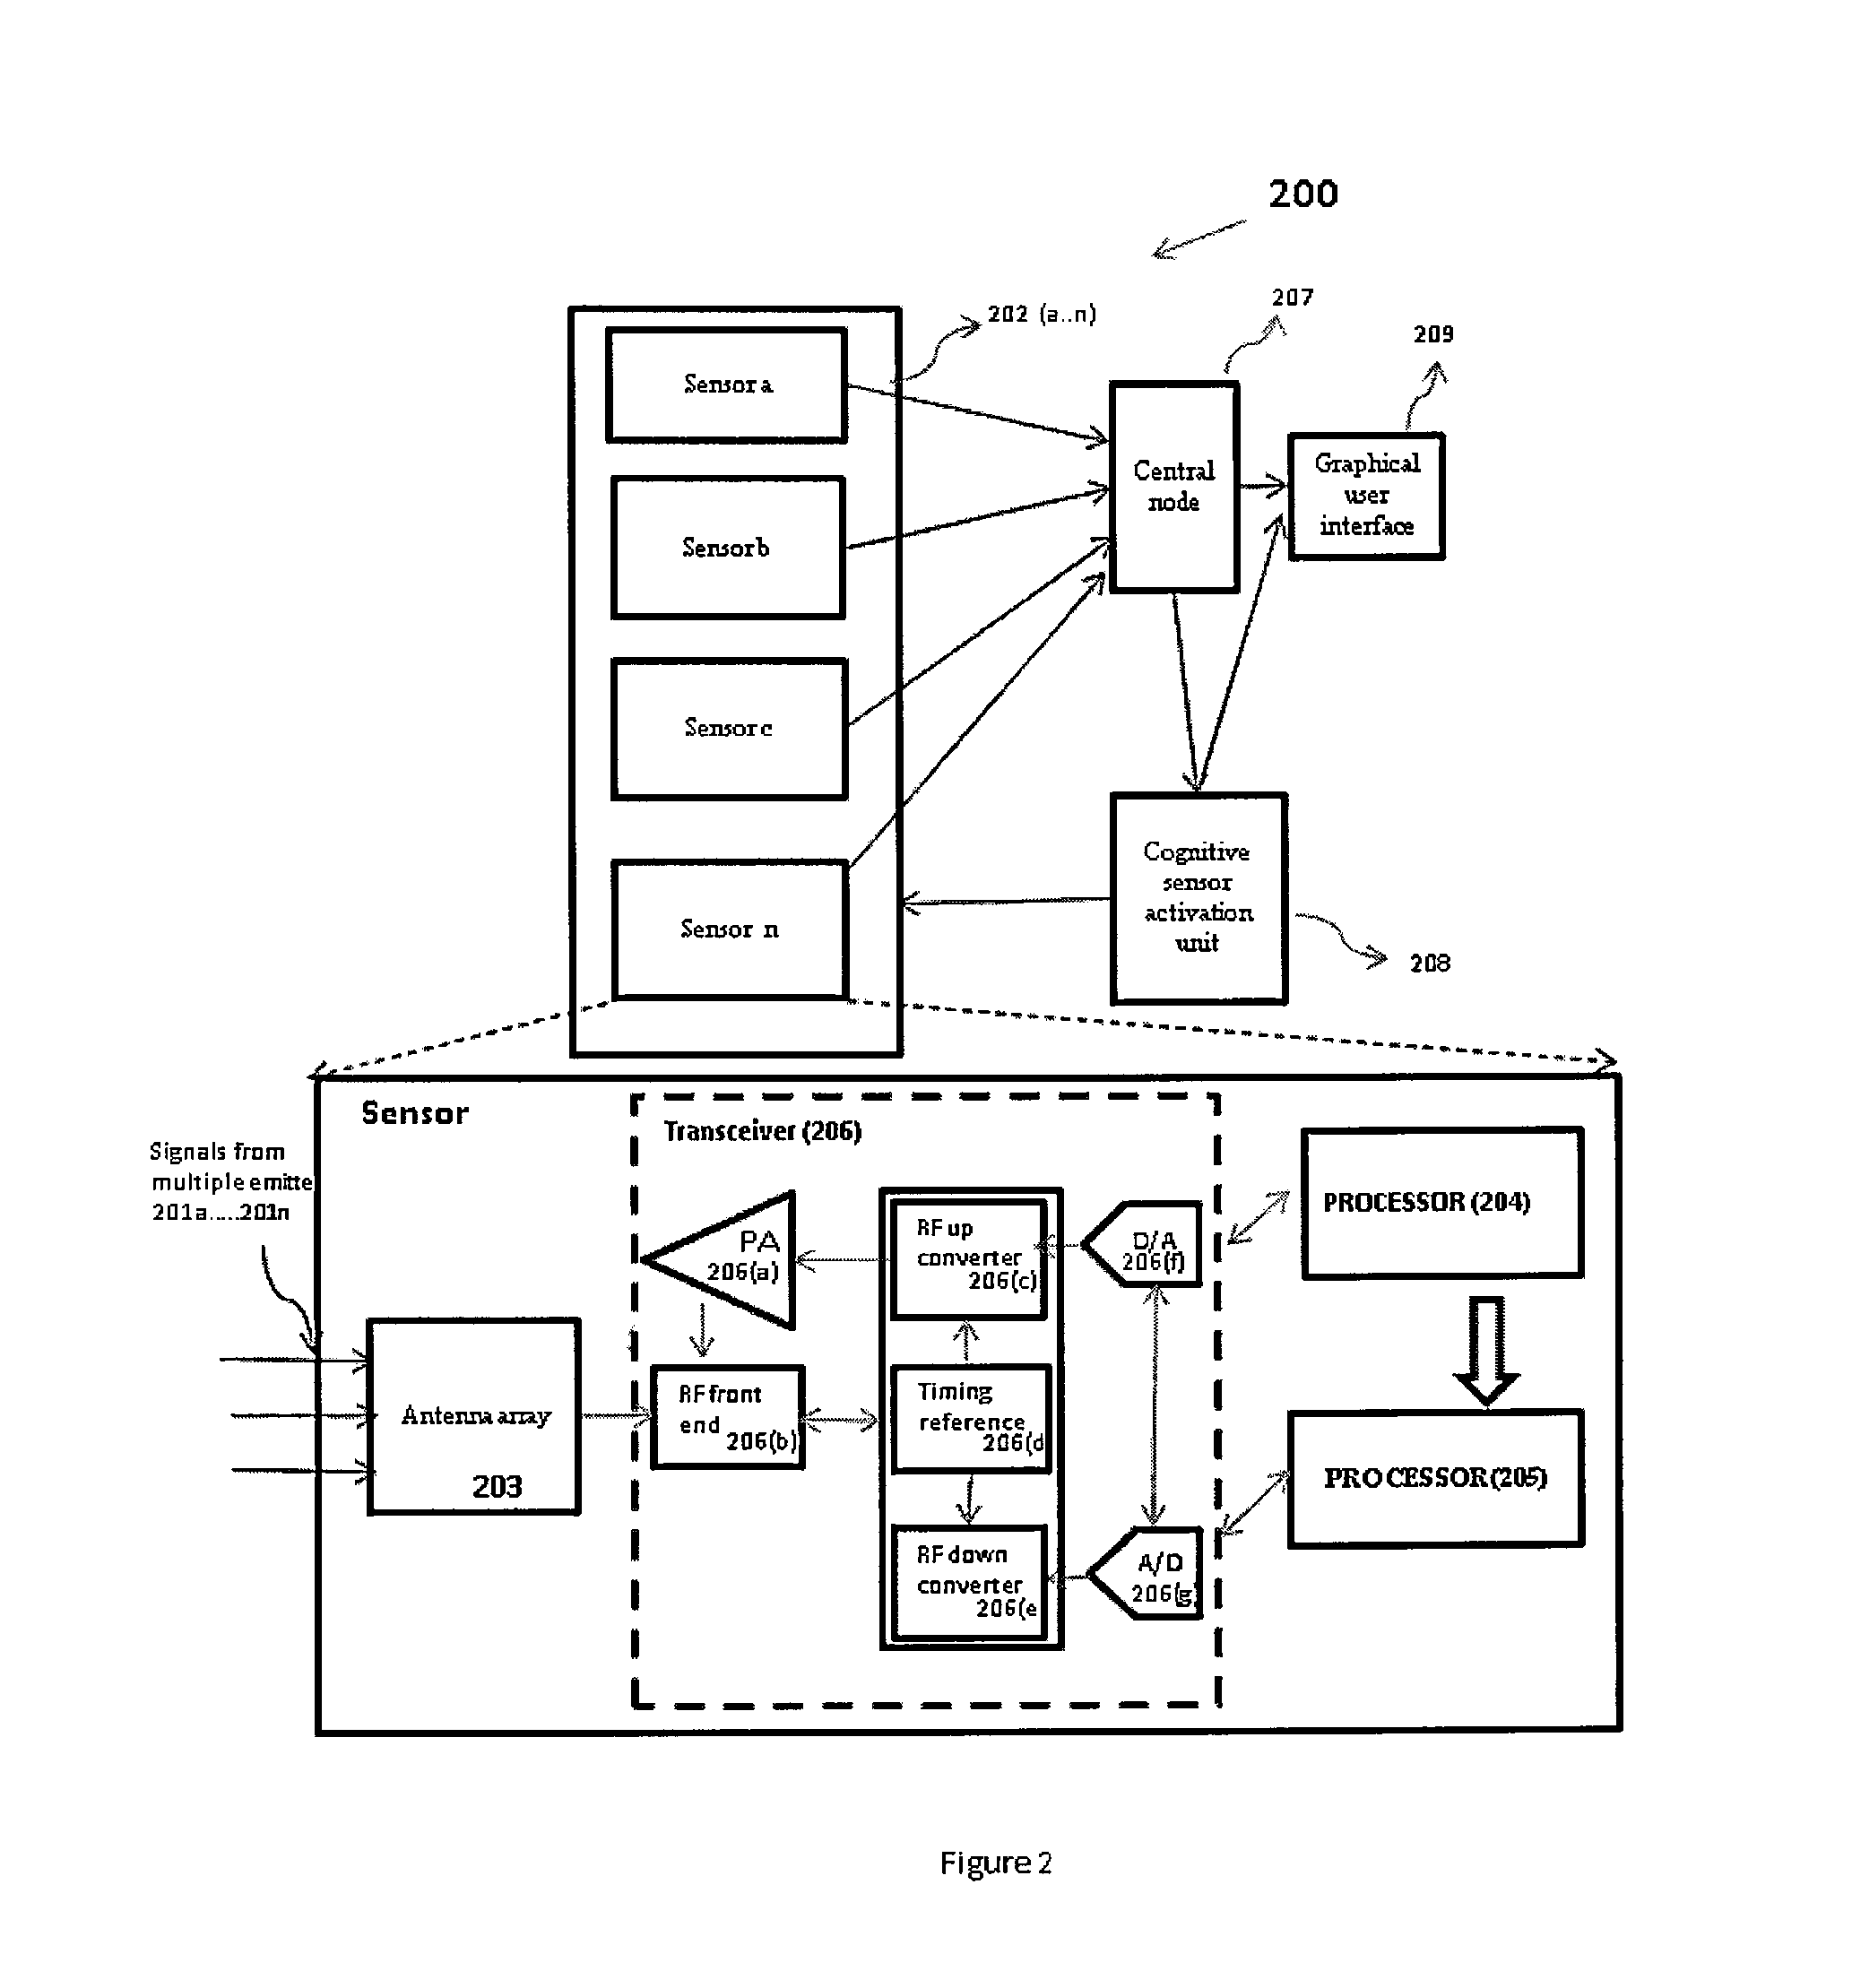 System and Methods for Non-Parametric Technique Based Geolocation and Cognitive Sensor Activation